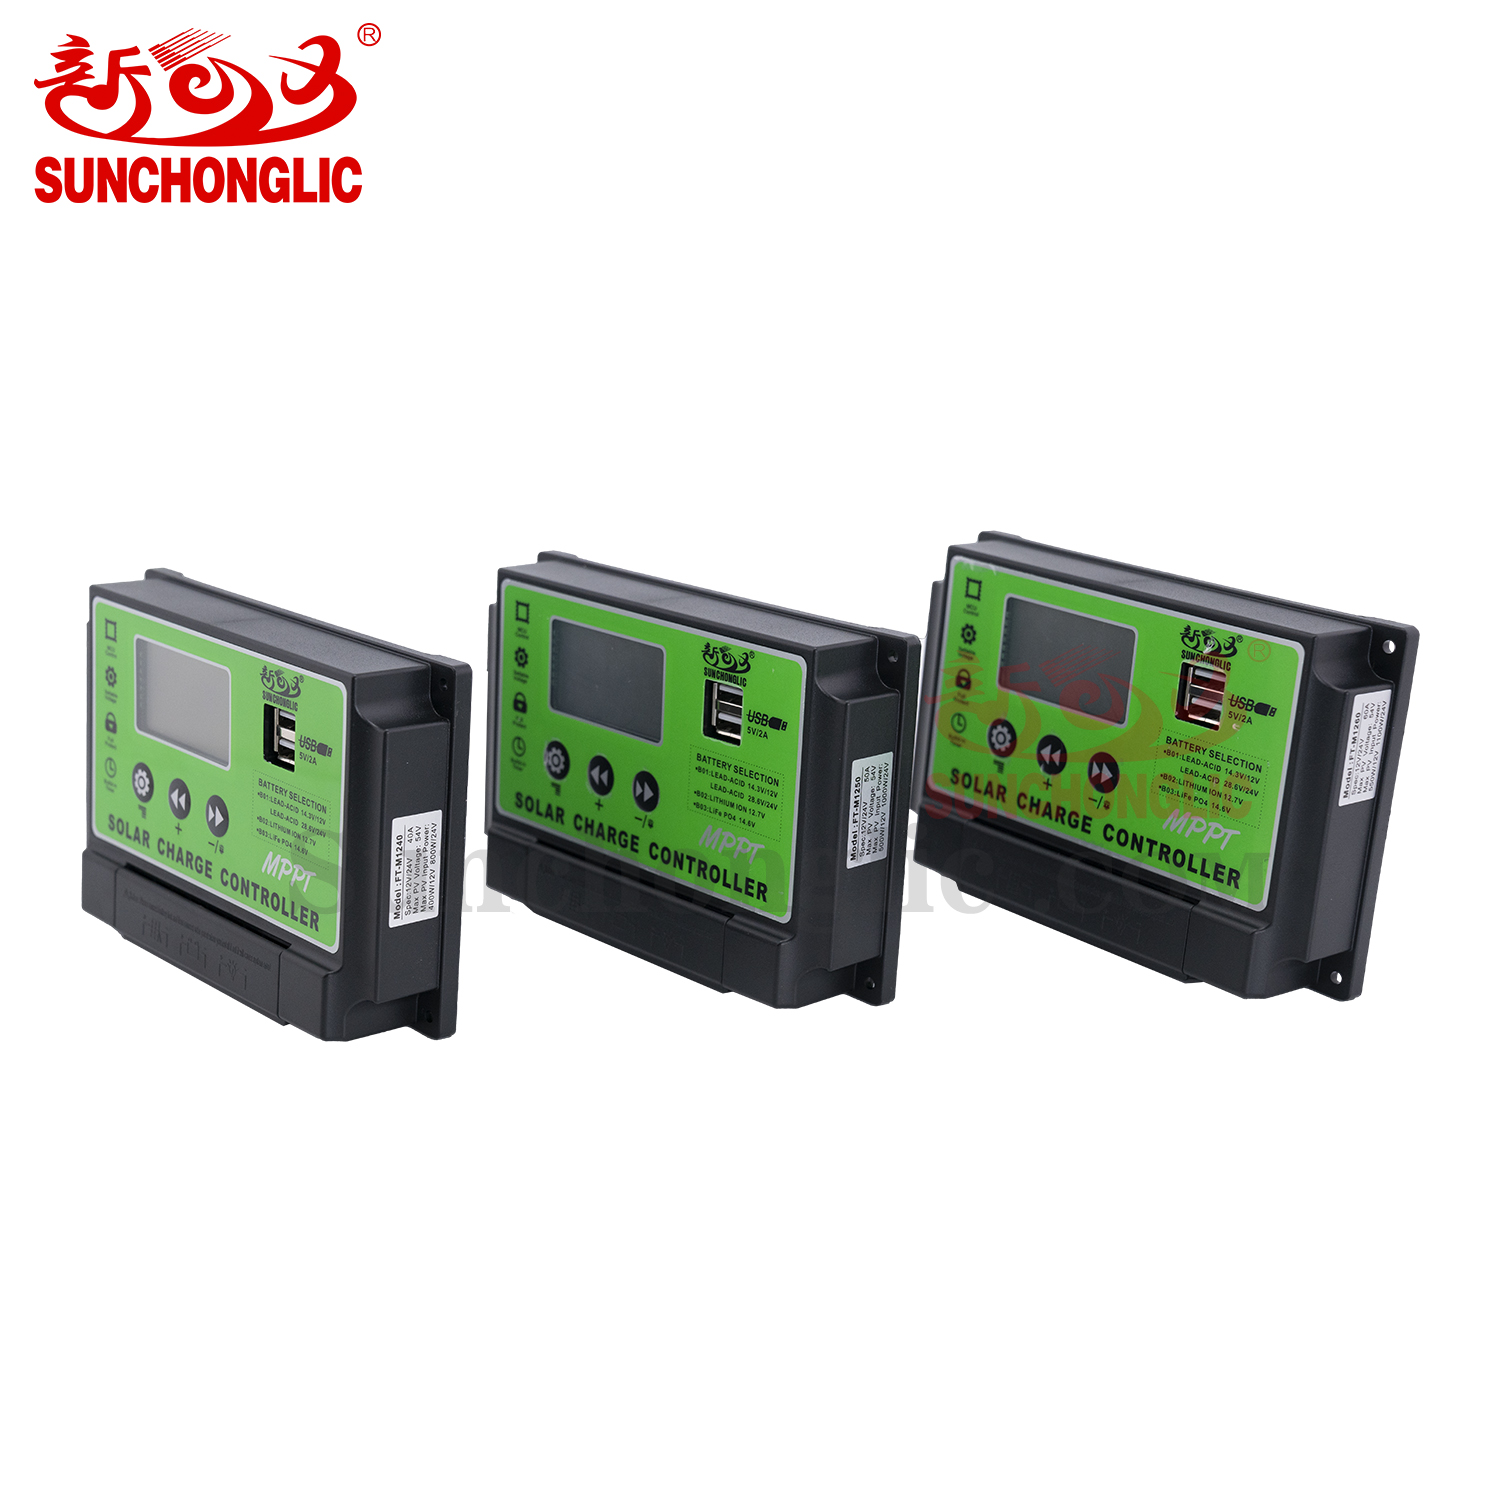 MPPT Solar Charge Controller - FT-M1260